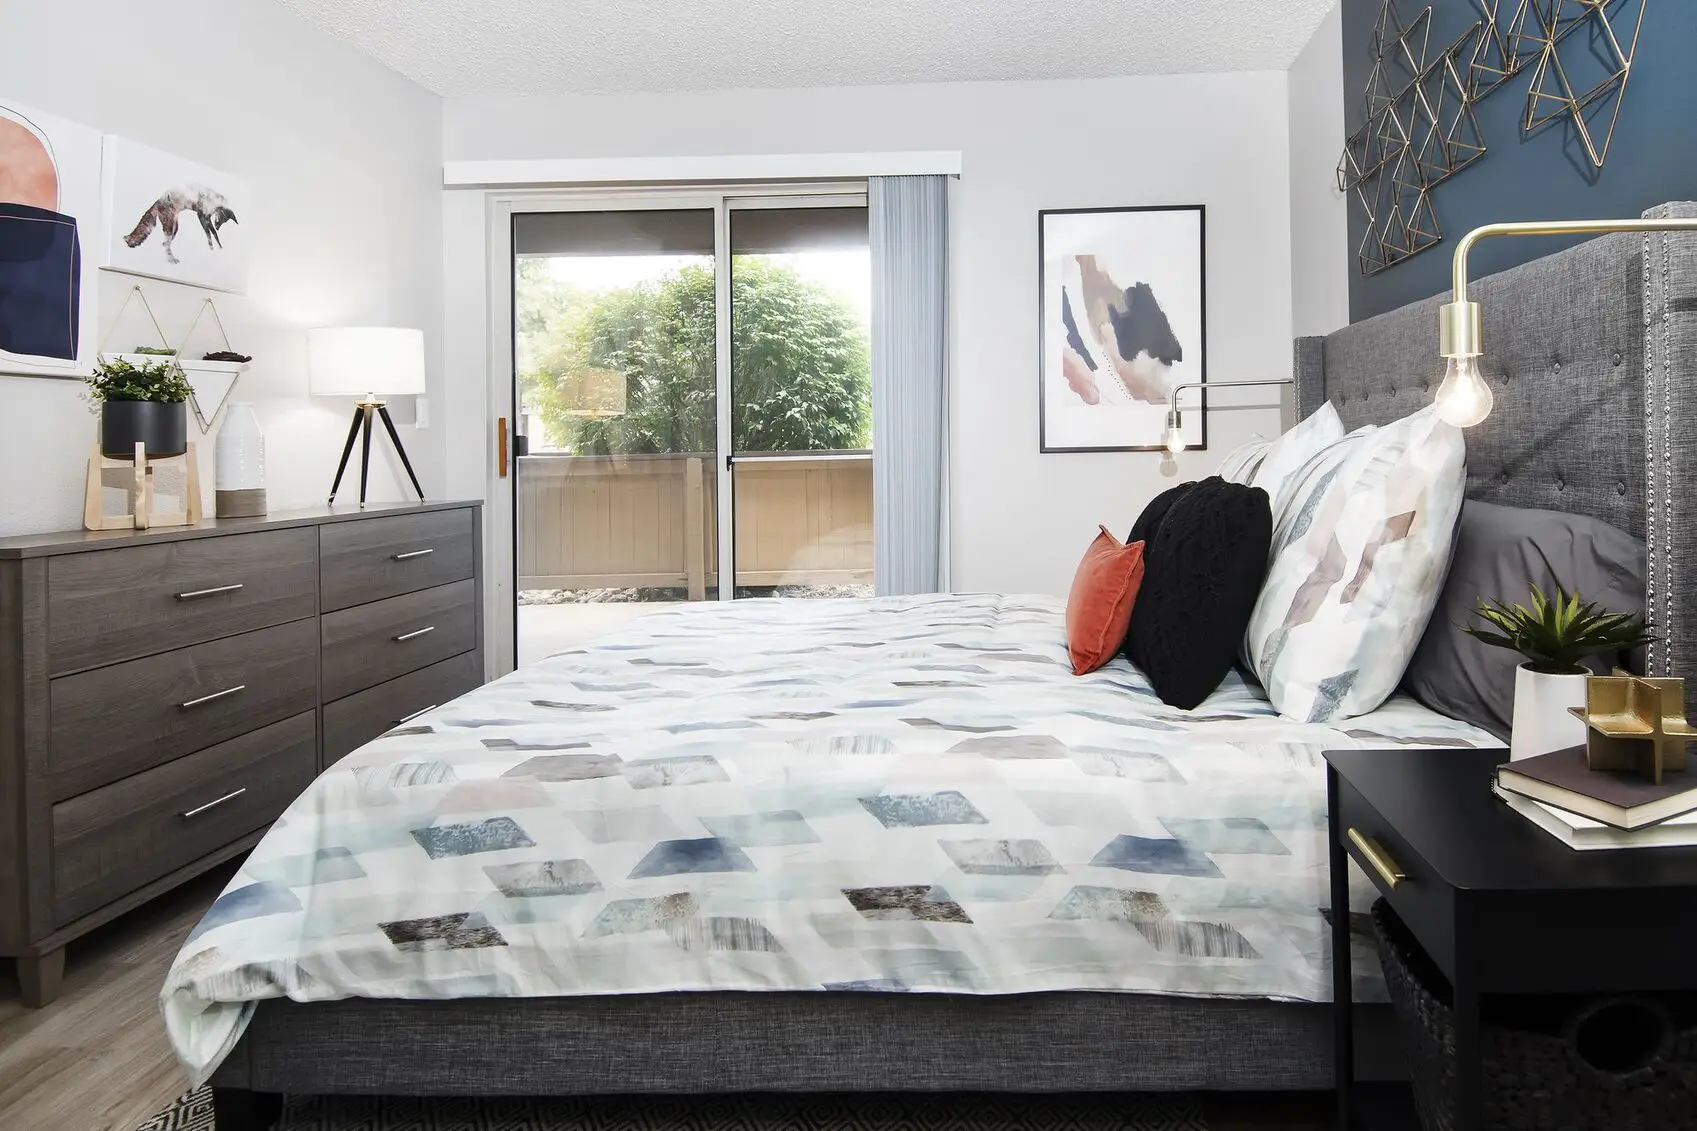 Staged bedroom with blue accent wall and glass patio doors